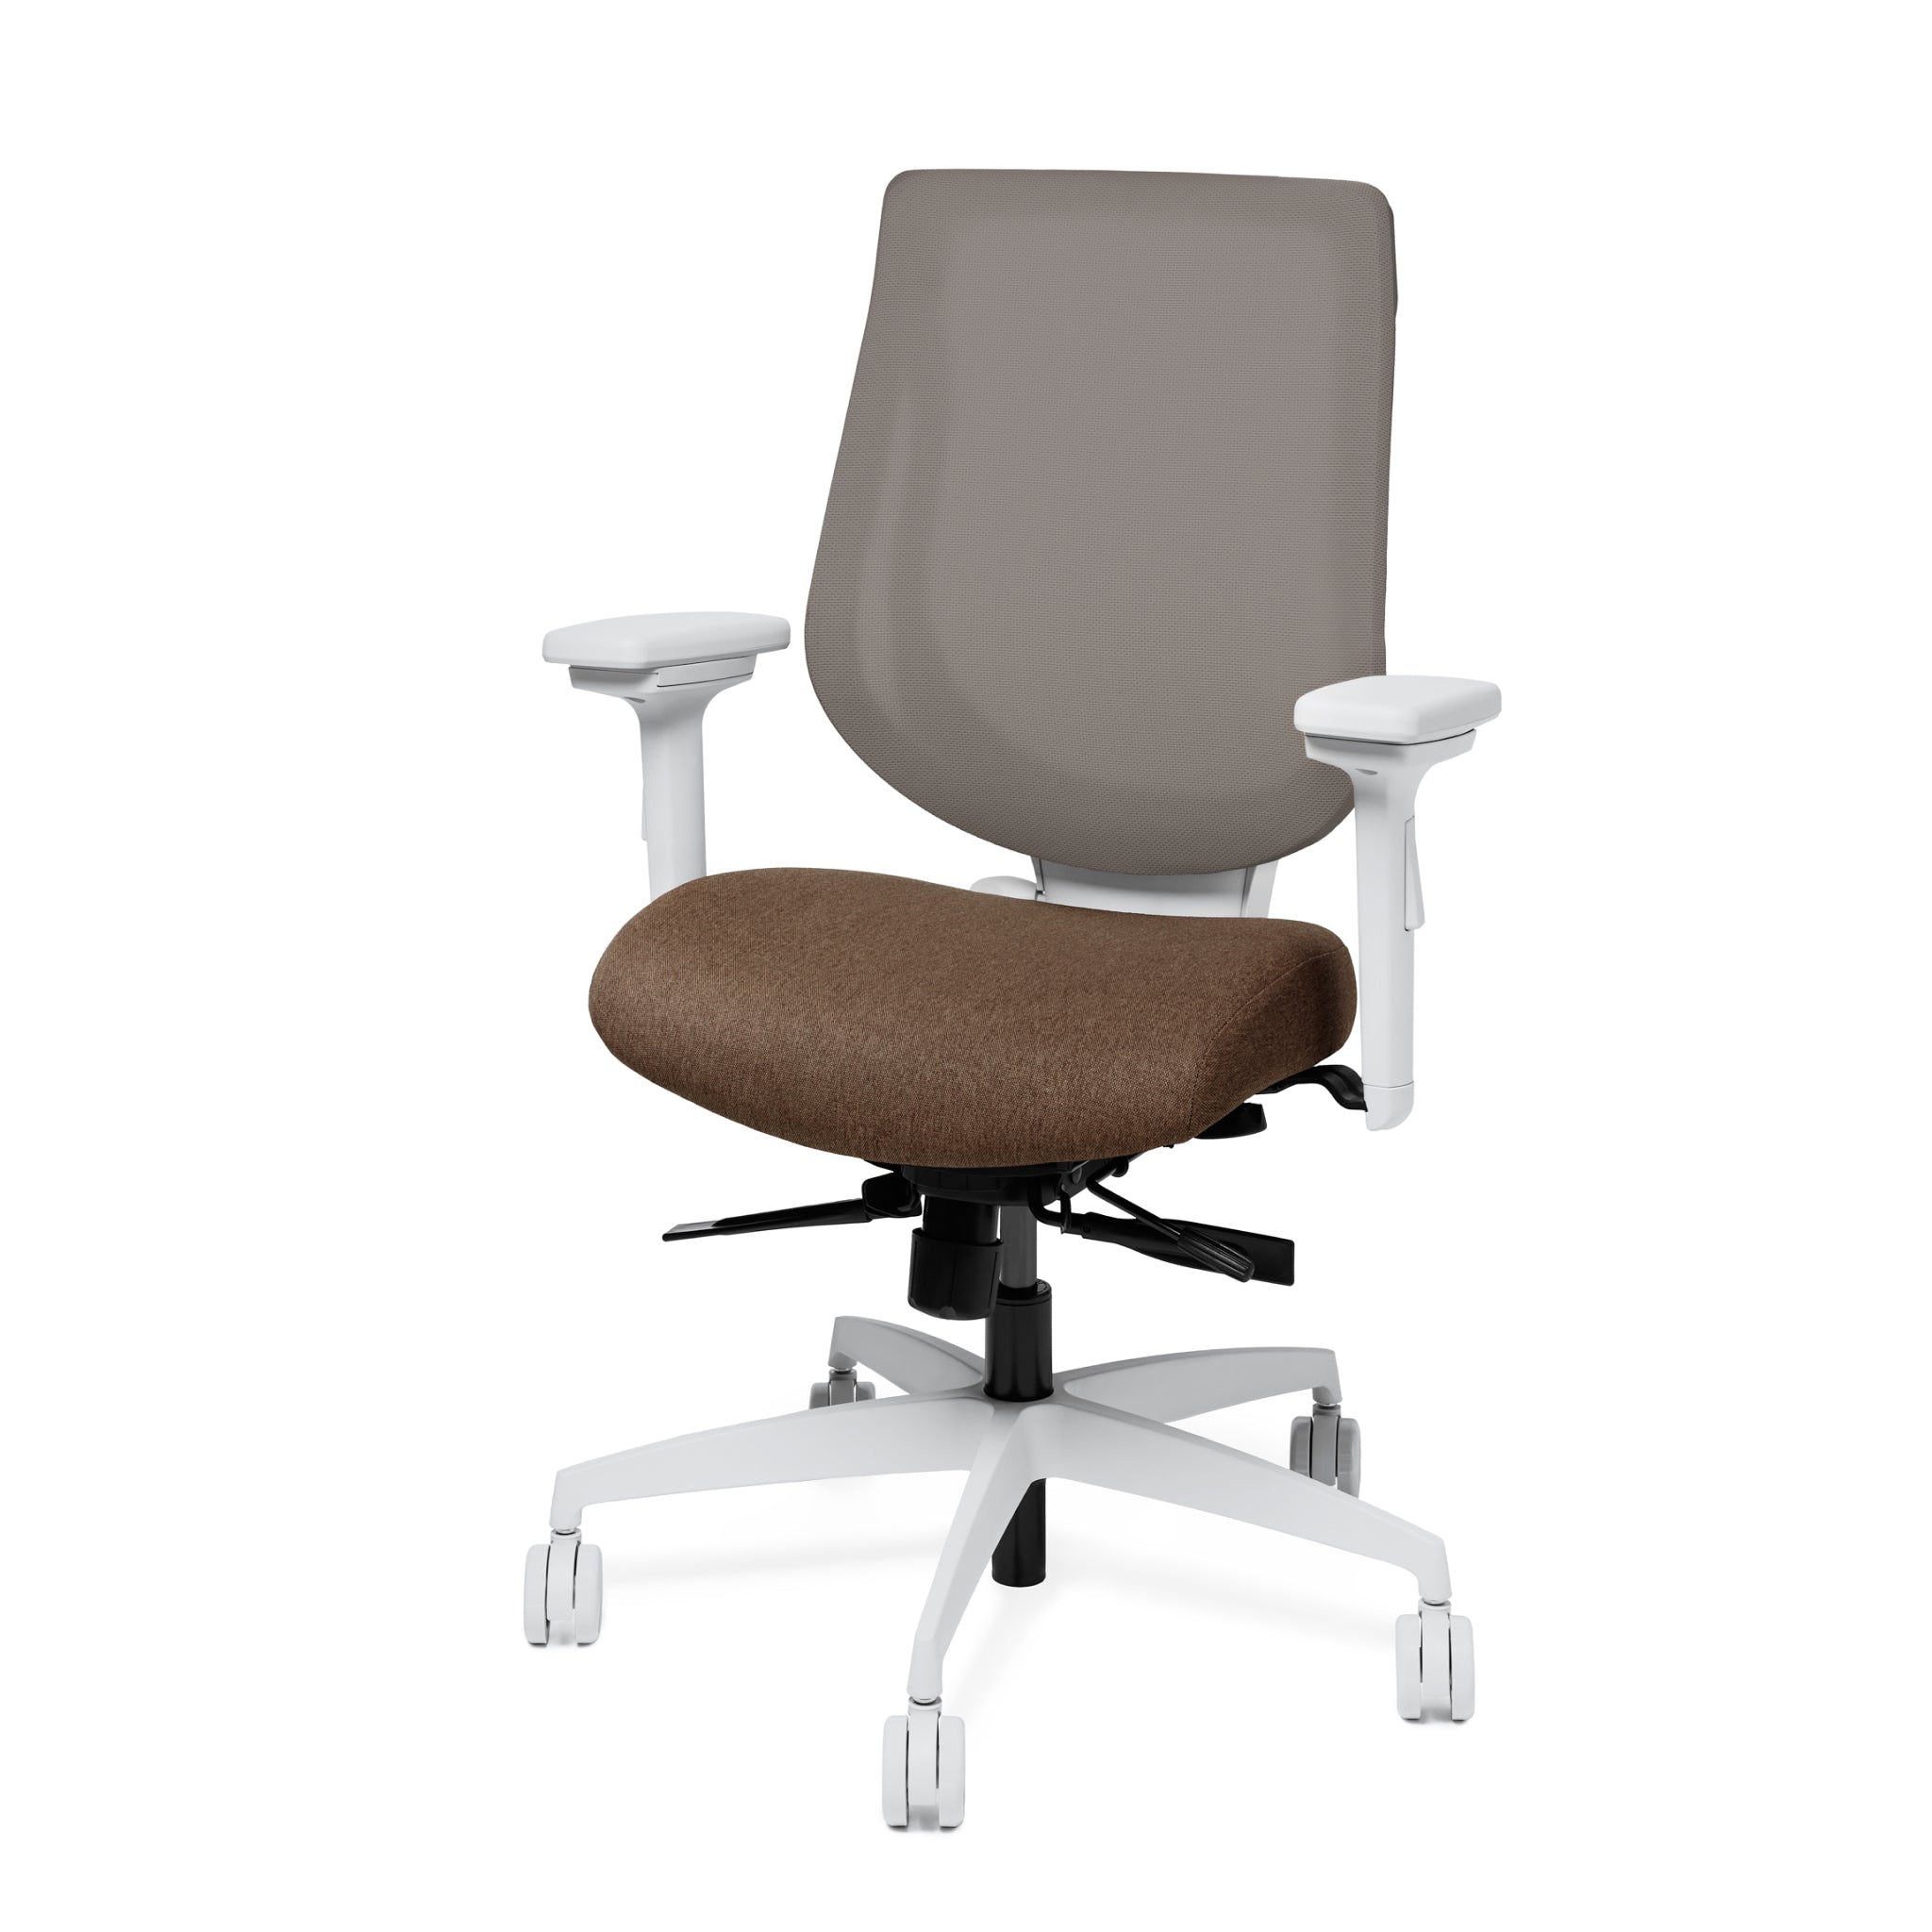  Small YouToo Ergonomic Chair - Ash-Almond – Clay